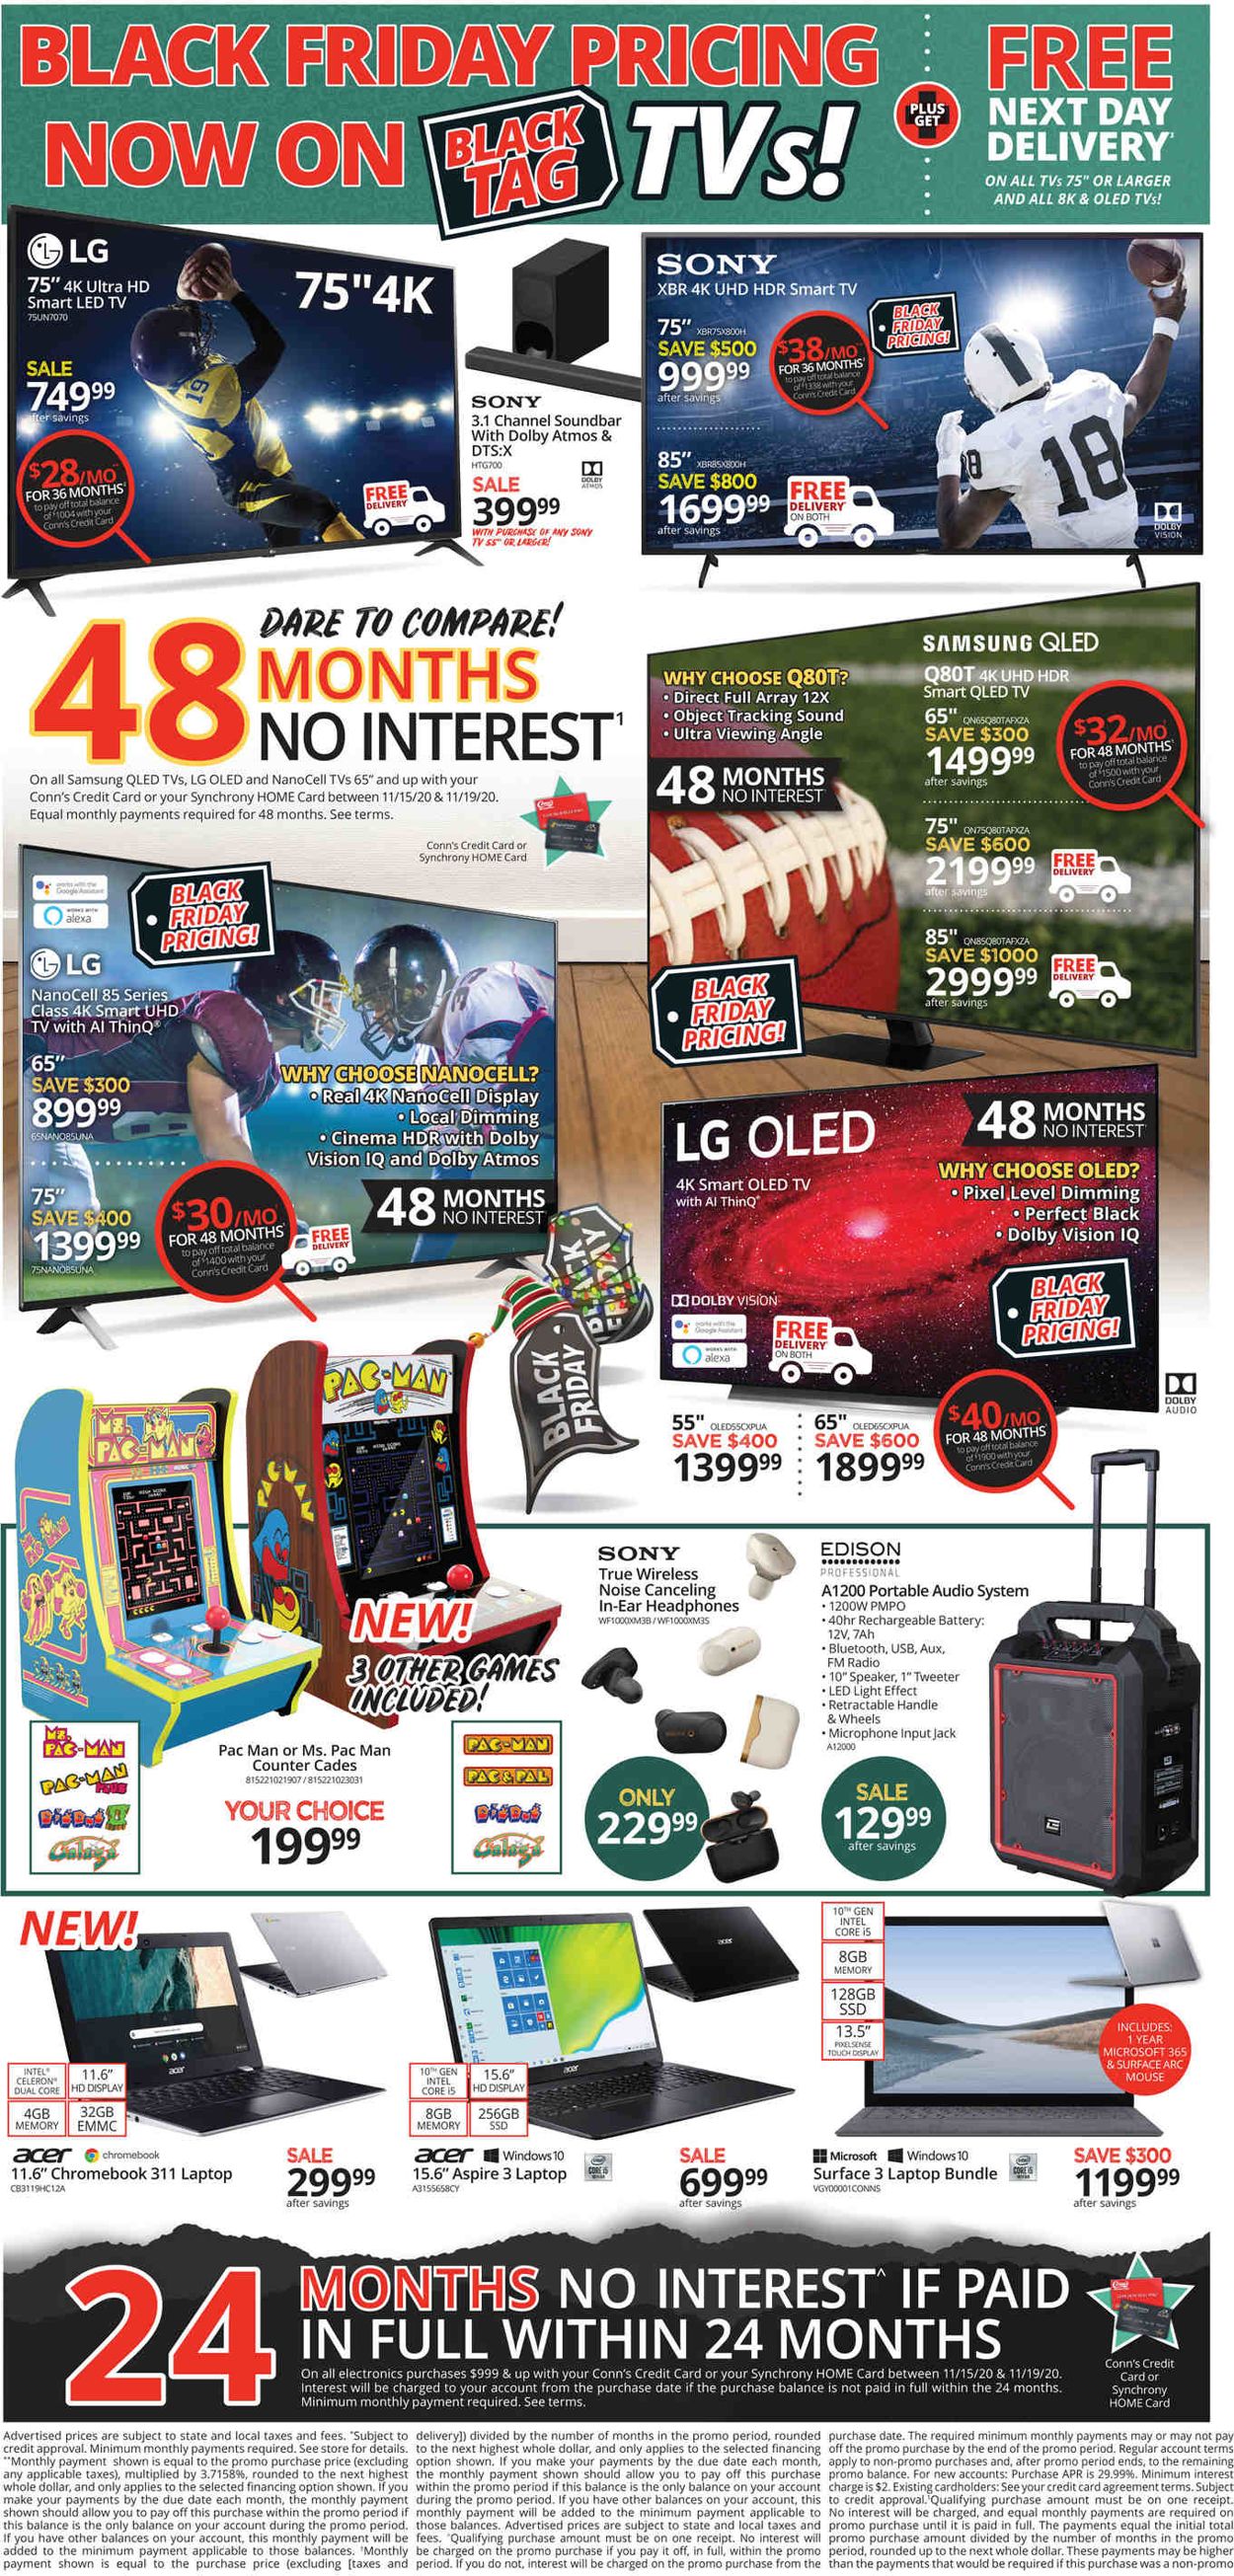 Conn's Home Plus Black Friday 2020 Weekly Ad Circular - valid 11/15-11/19/2020 (Page 2)